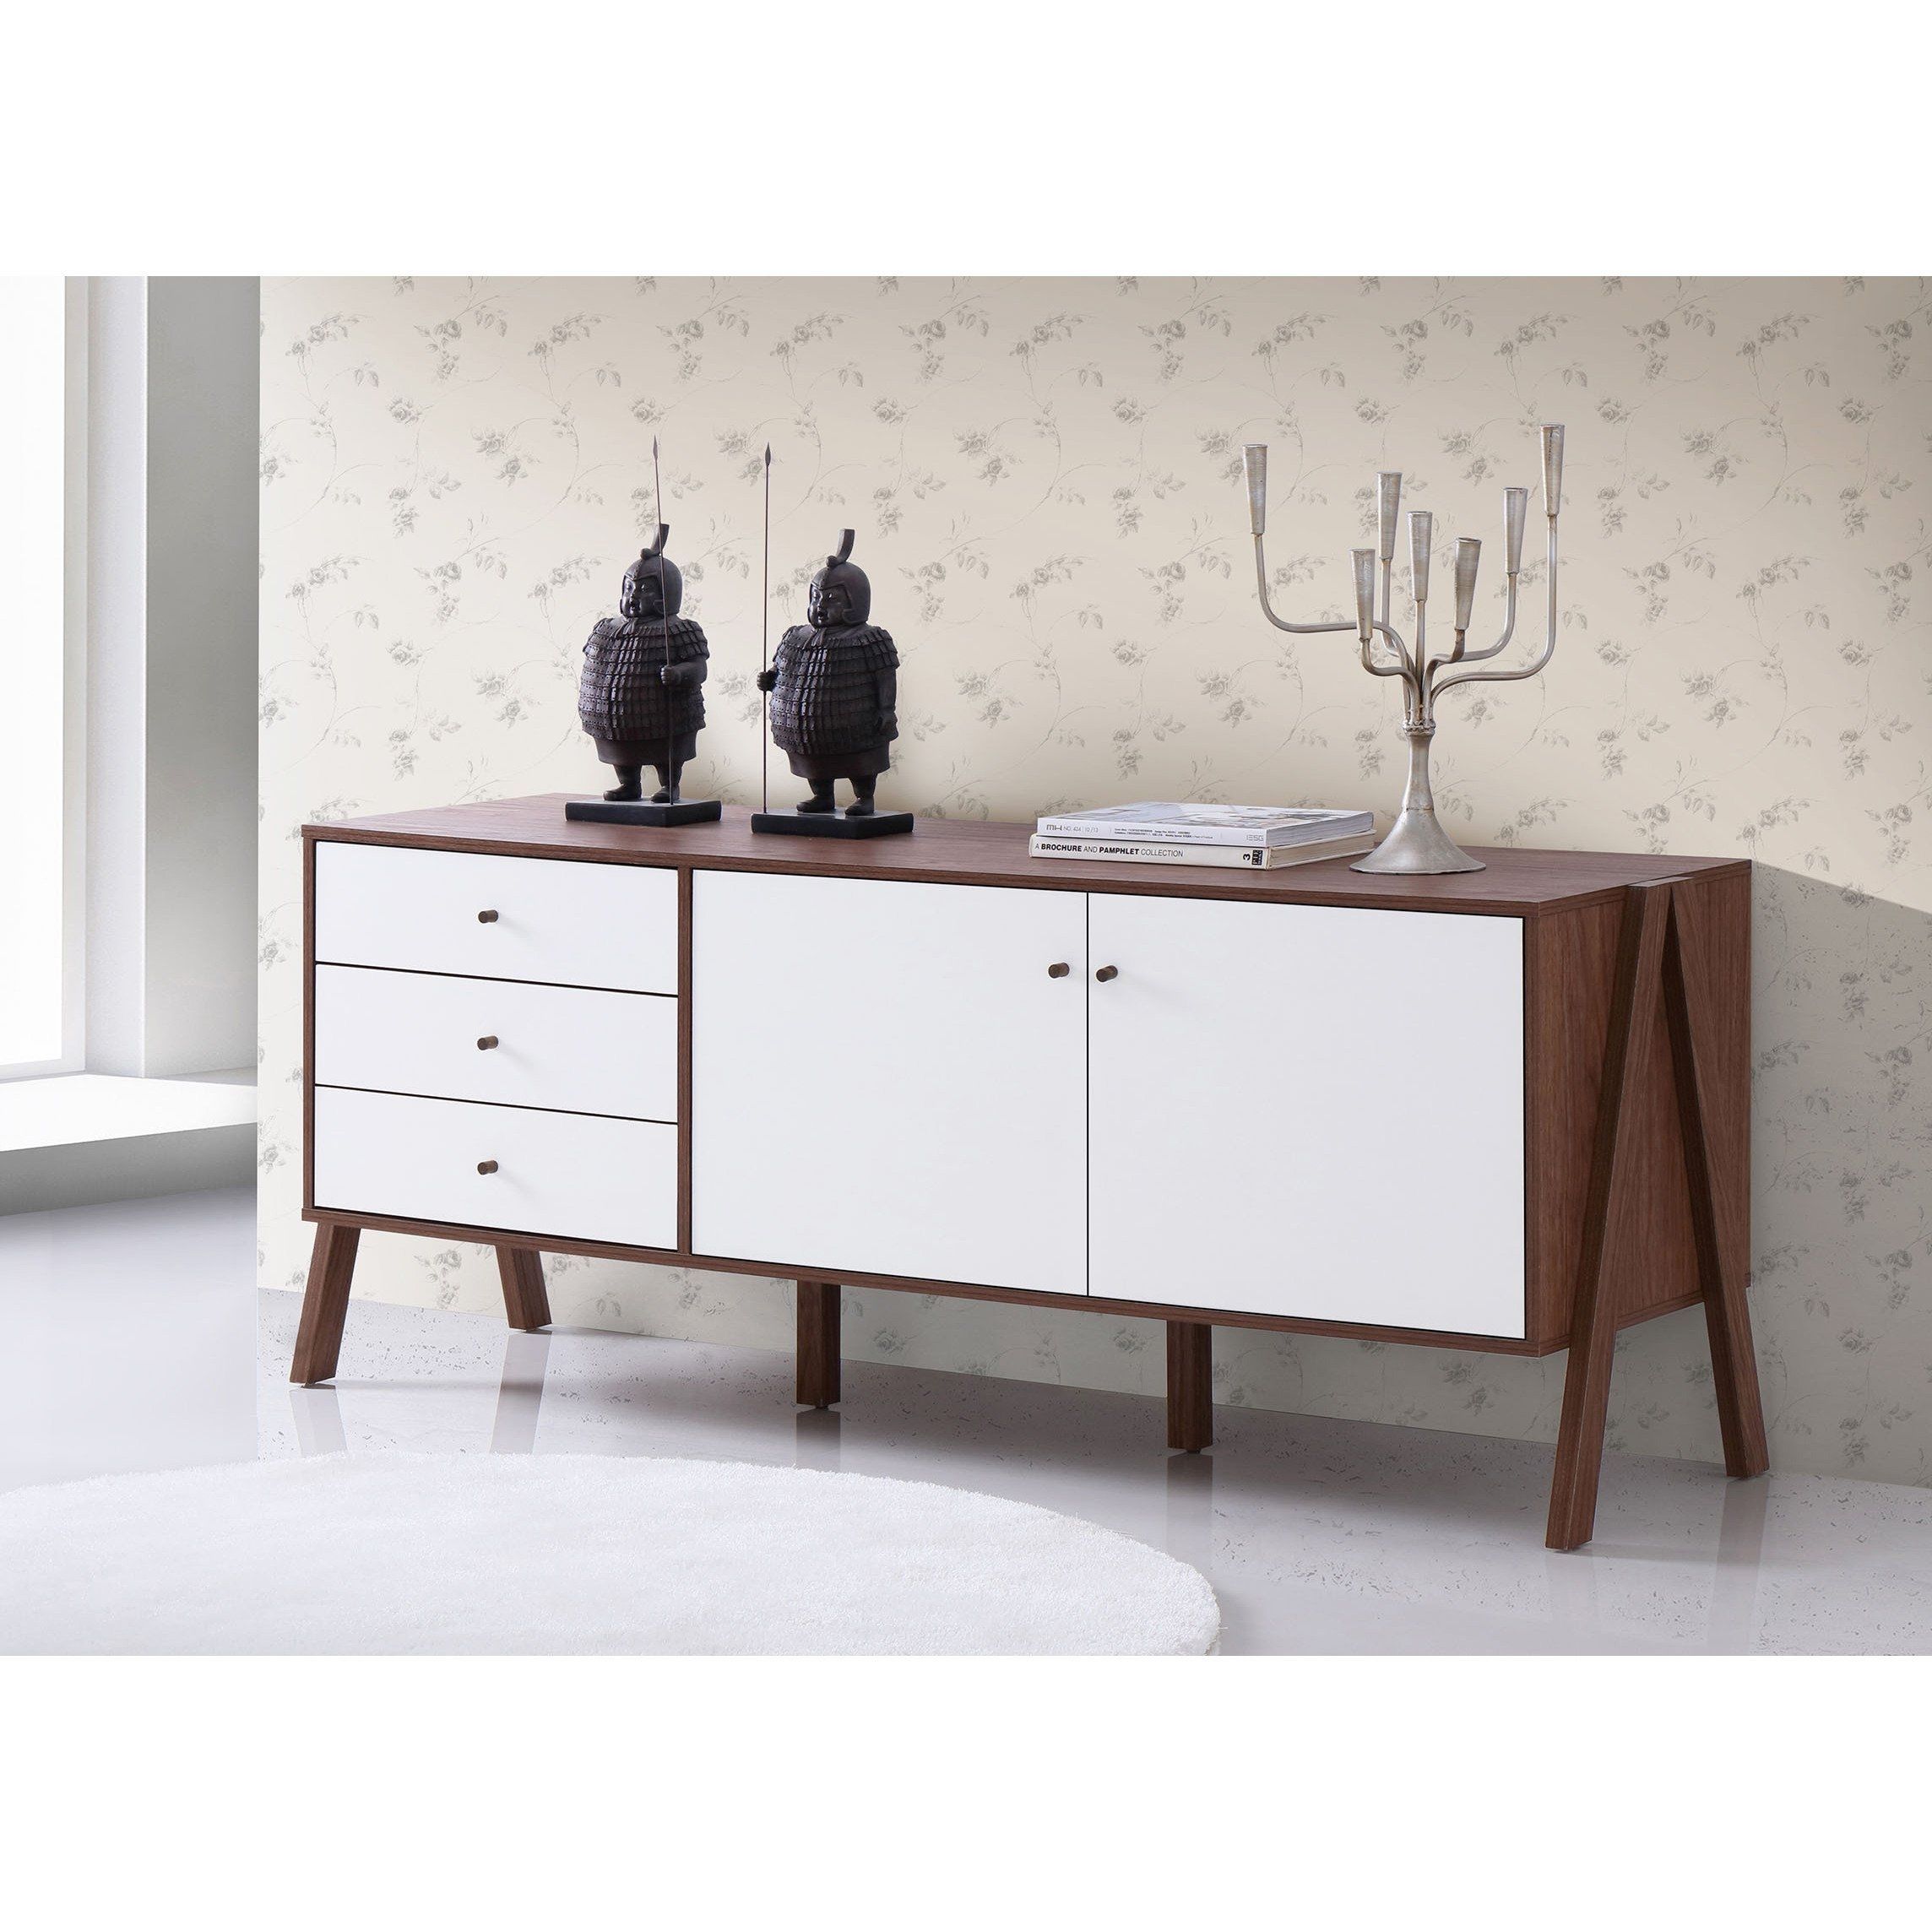 Shop Baxton Studio Harlow Mid Century Modern Scandinavian Style In Most Popular Walnut Finish Contempo Sideboards (View 19 of 20)